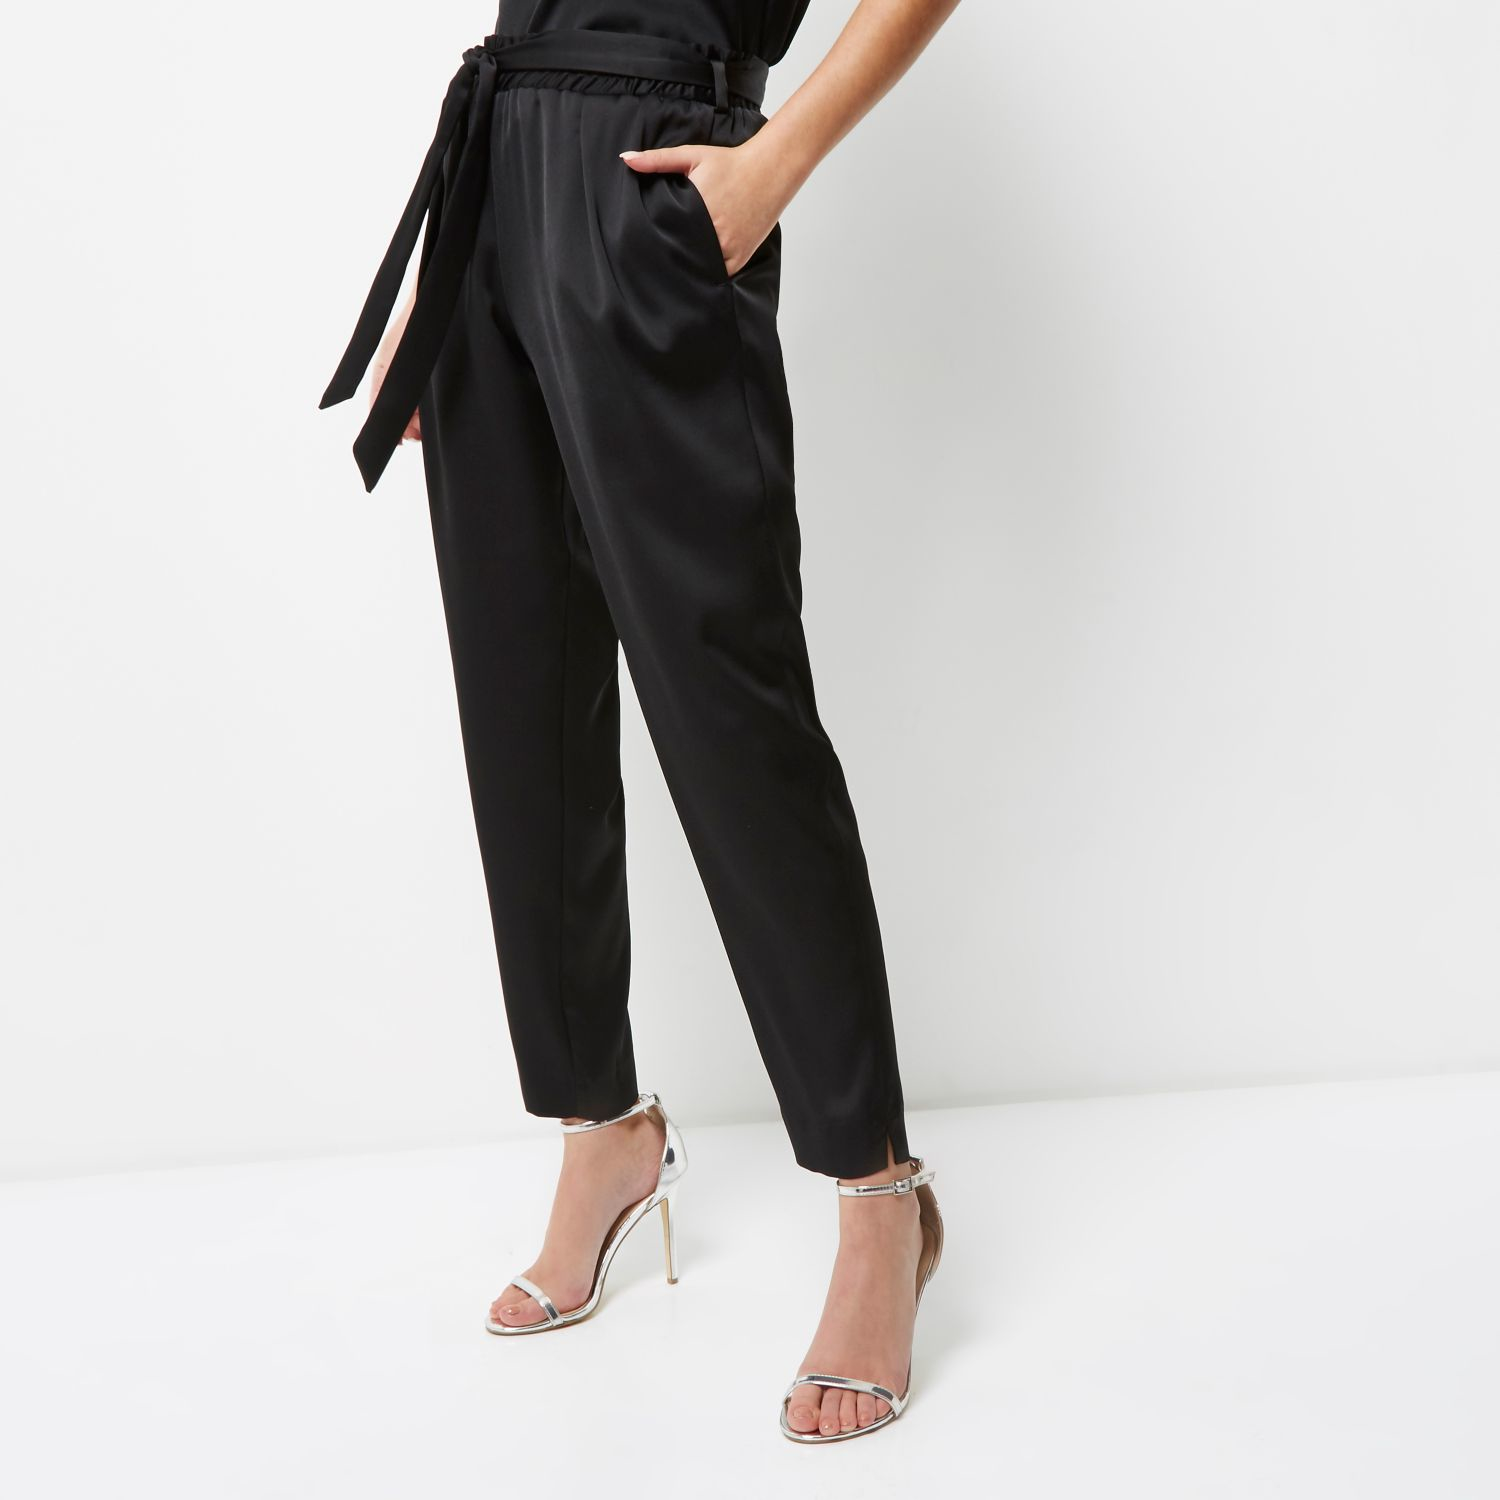 River island Black Military Slim Fit Trousers in Black | Lyst